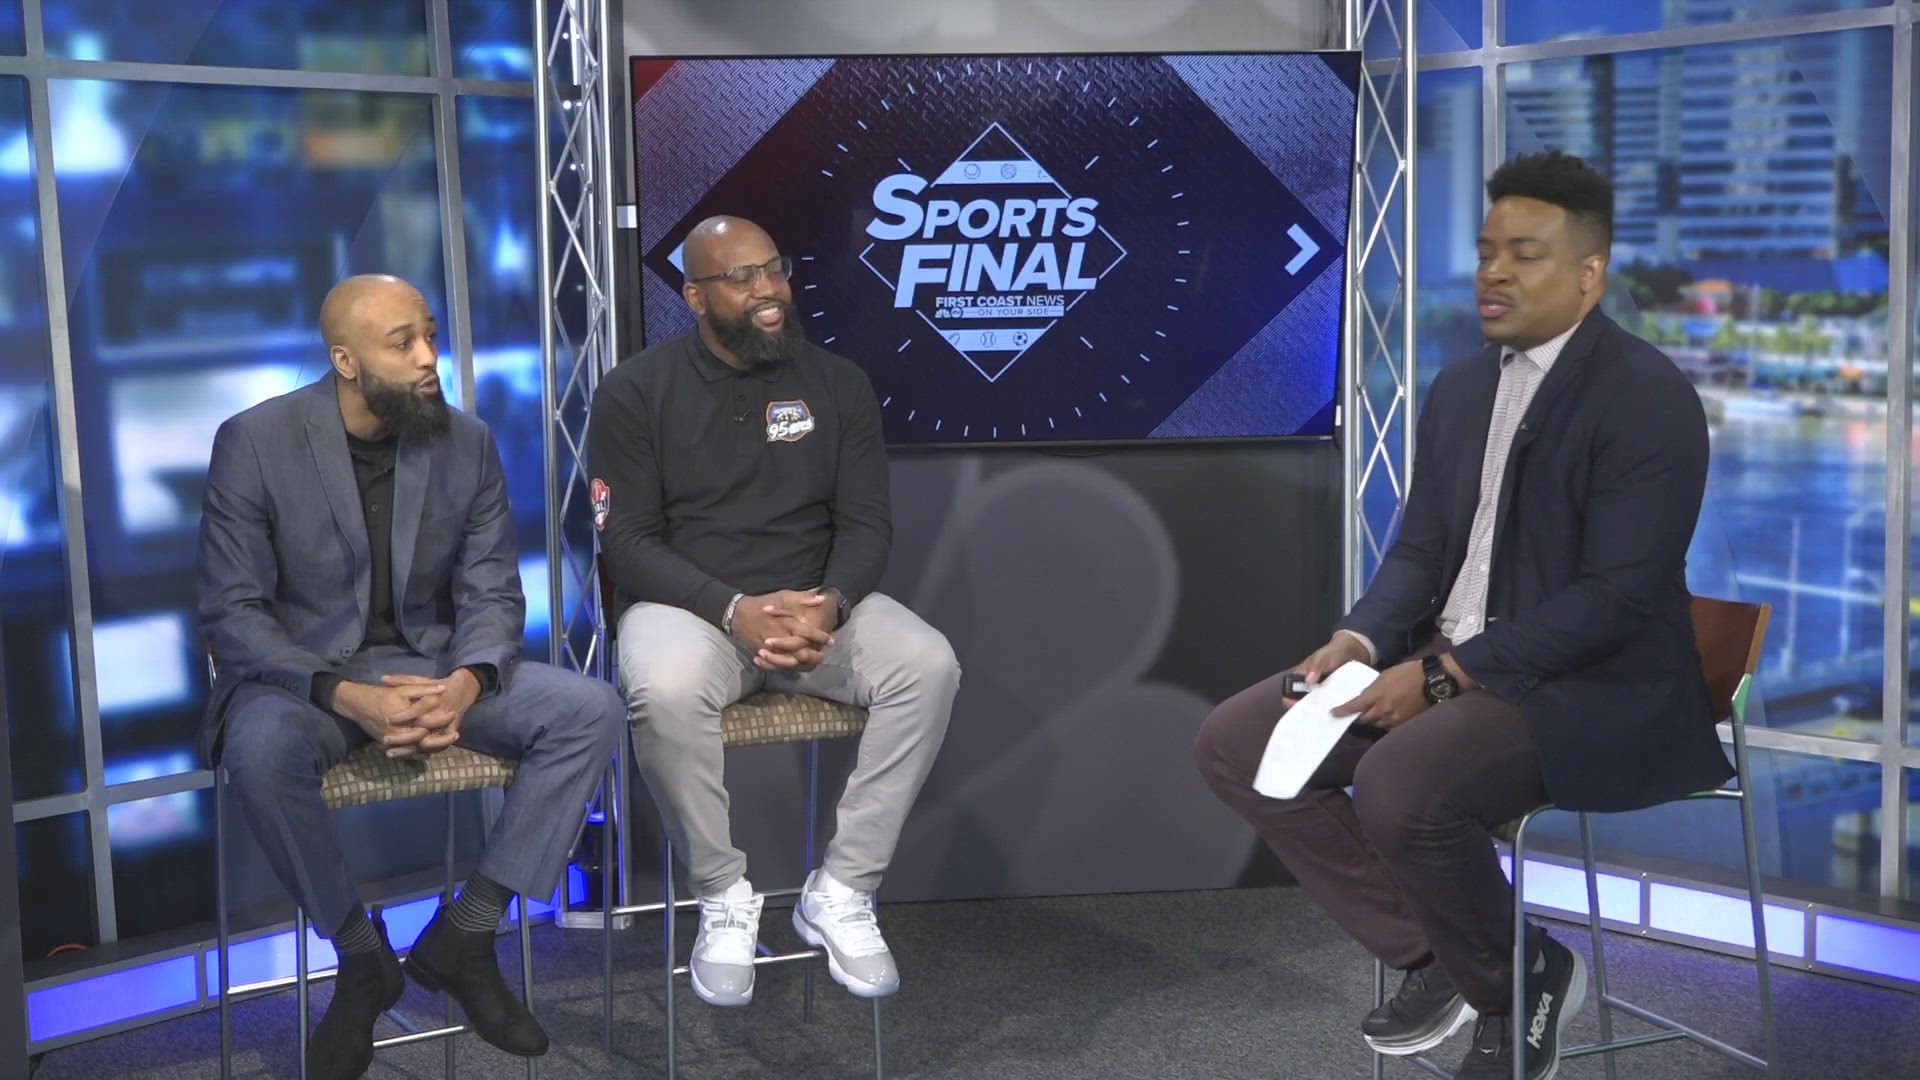 Jacksonville 95ers top brass join Sports Final to talk hoops